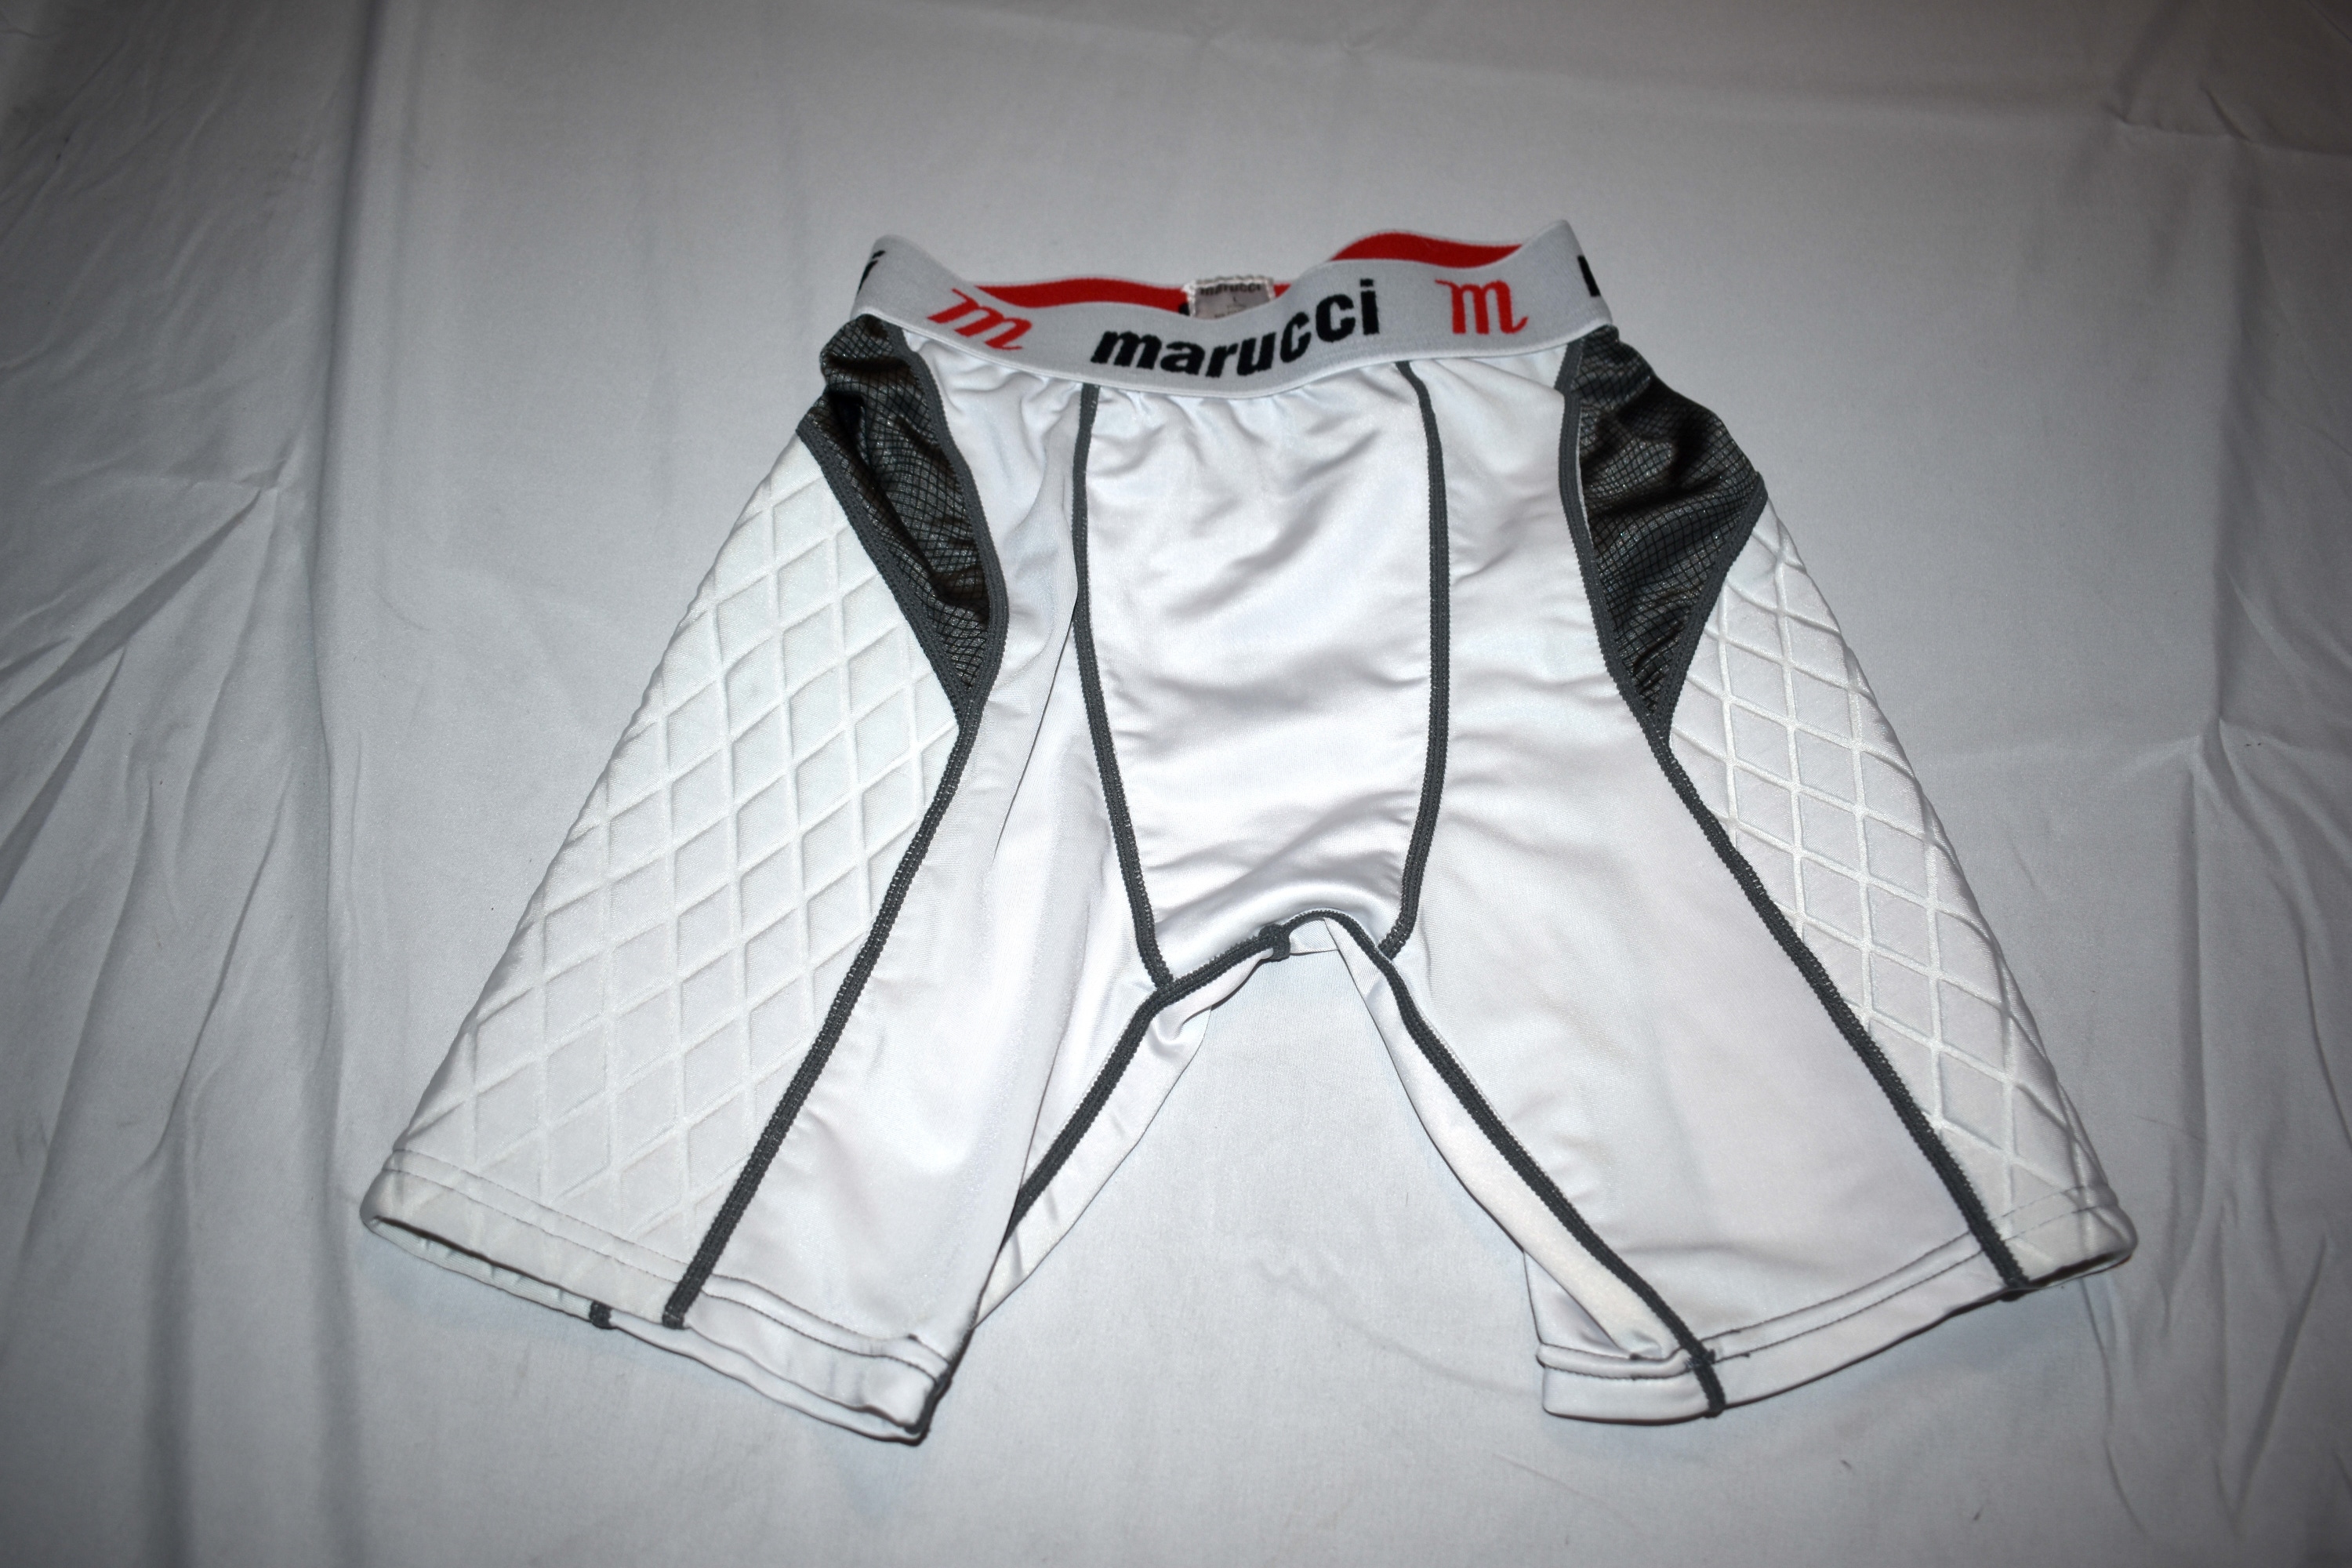 SafeTGard Compression Shorts AND McDavid Athletic Brief w/ Cup